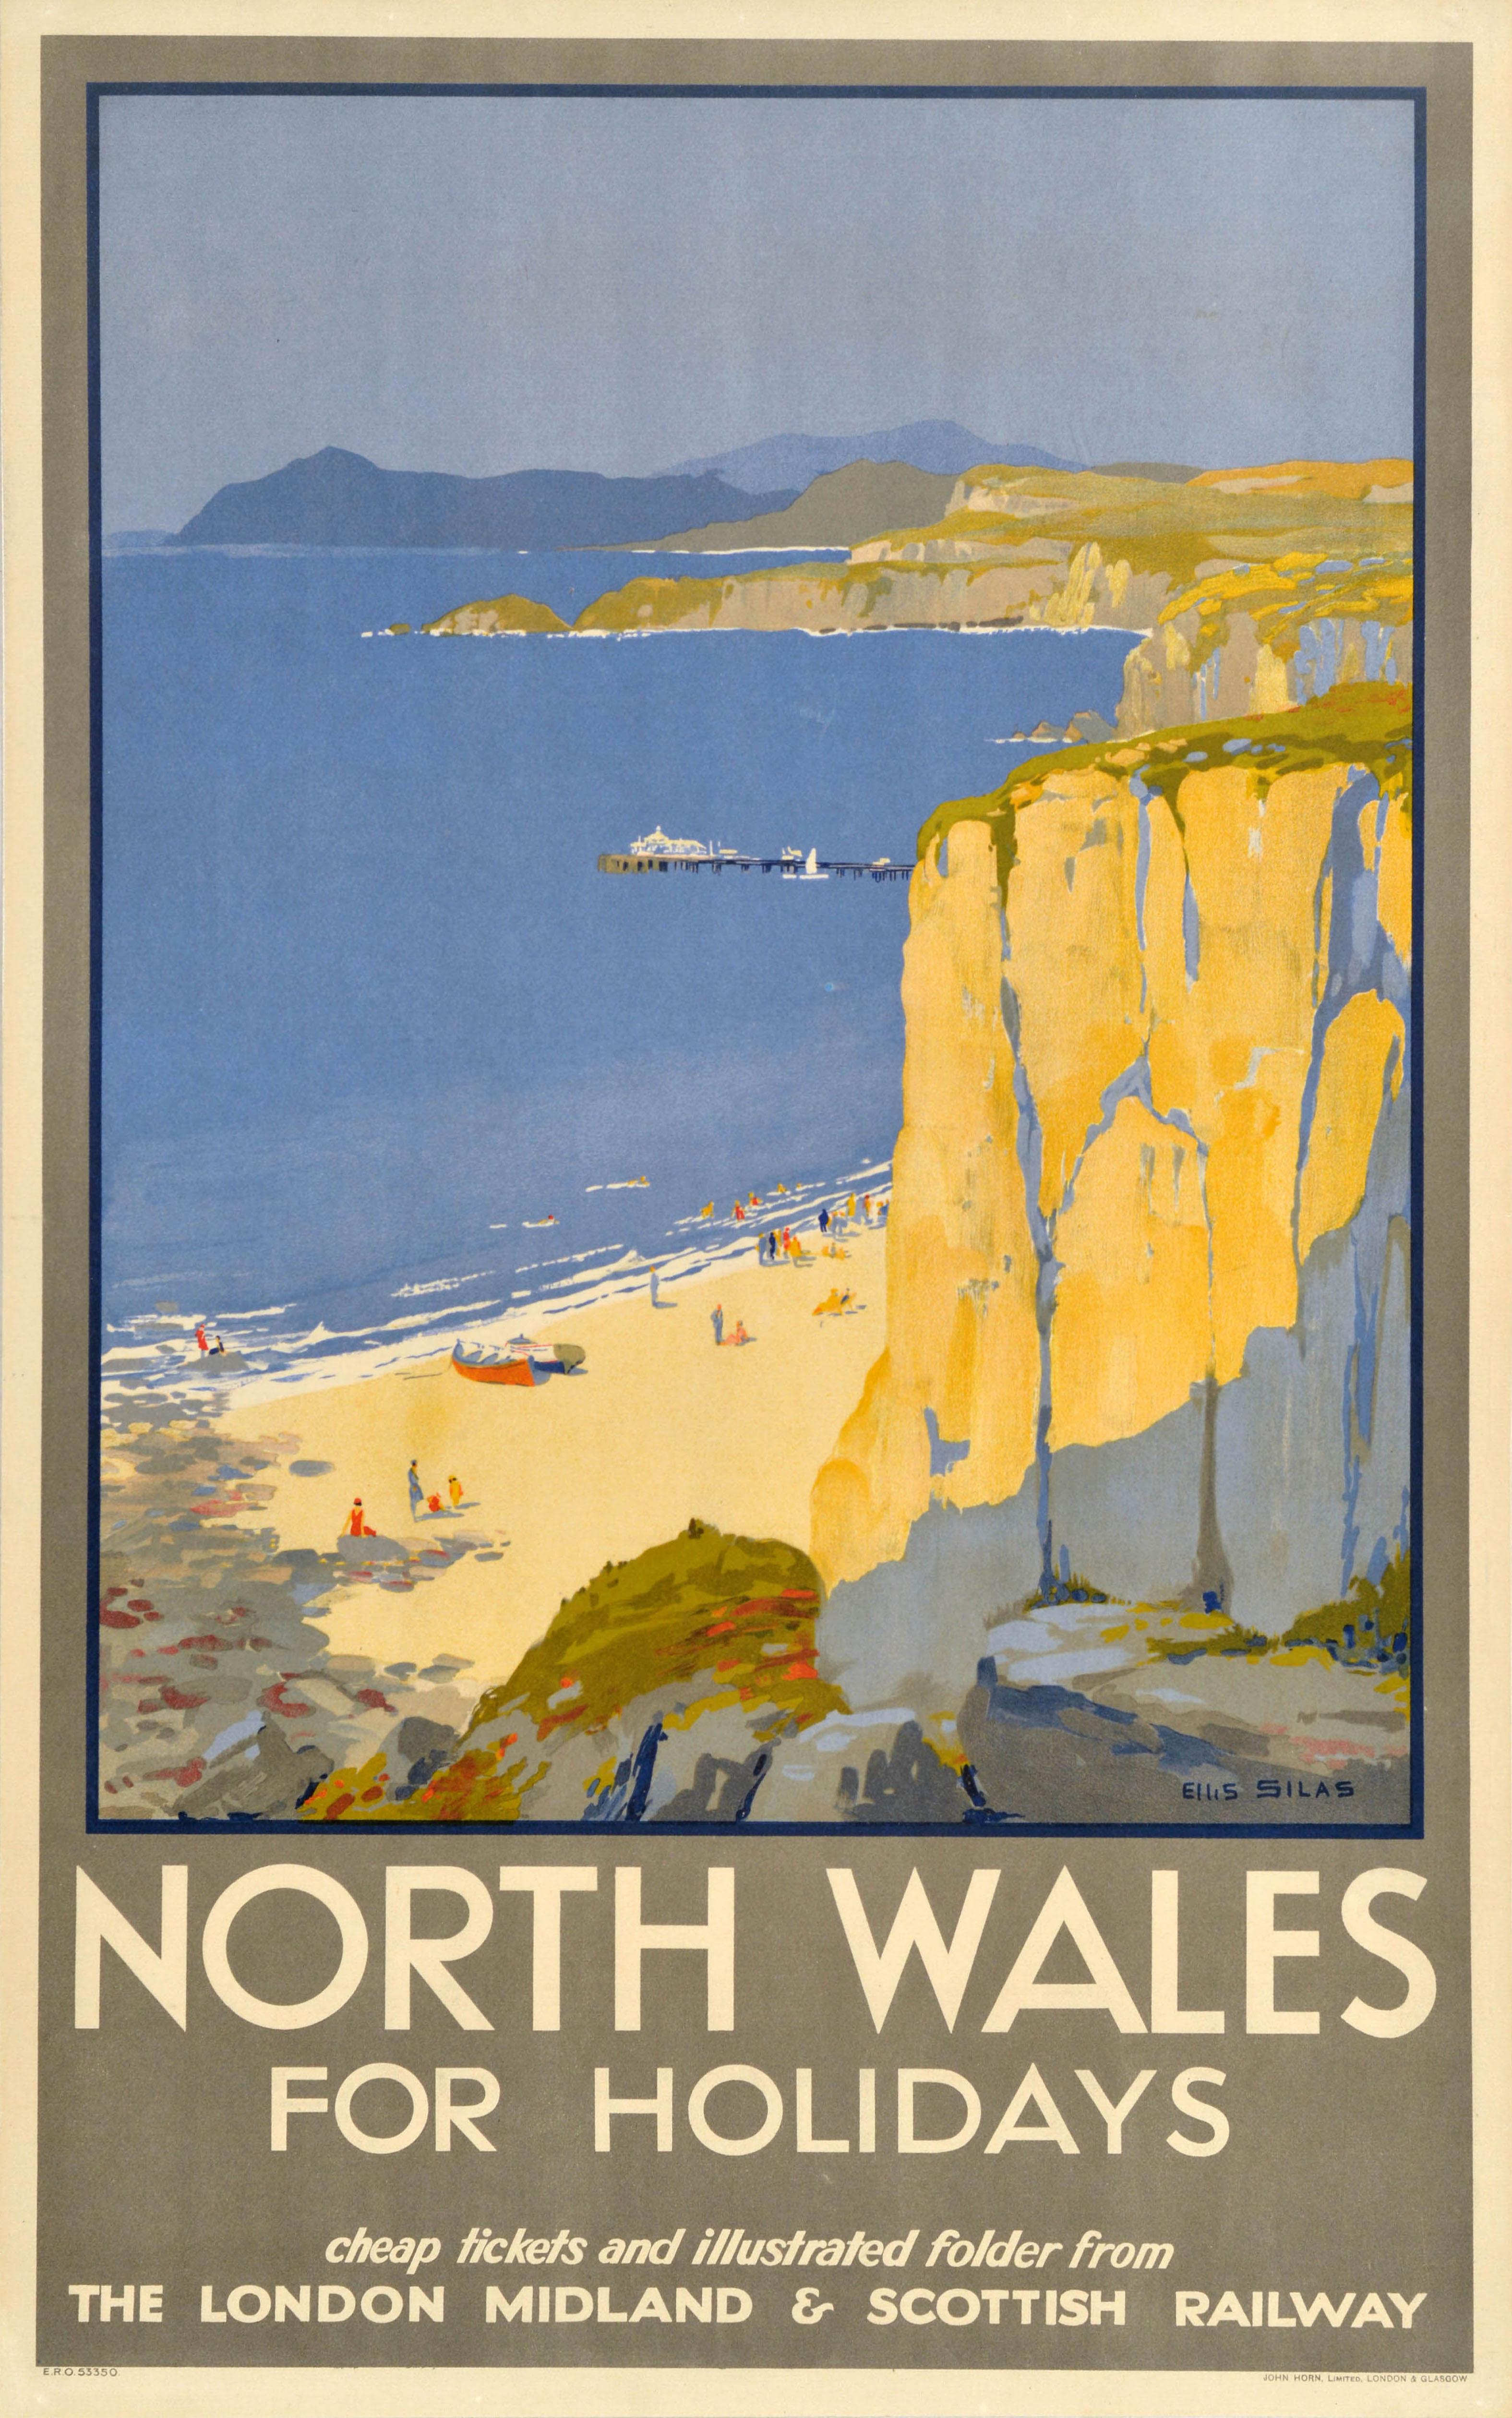 Unknown Print - Original Vintage Train Travel Poster North Wales For Holidays LMS Railway Coast